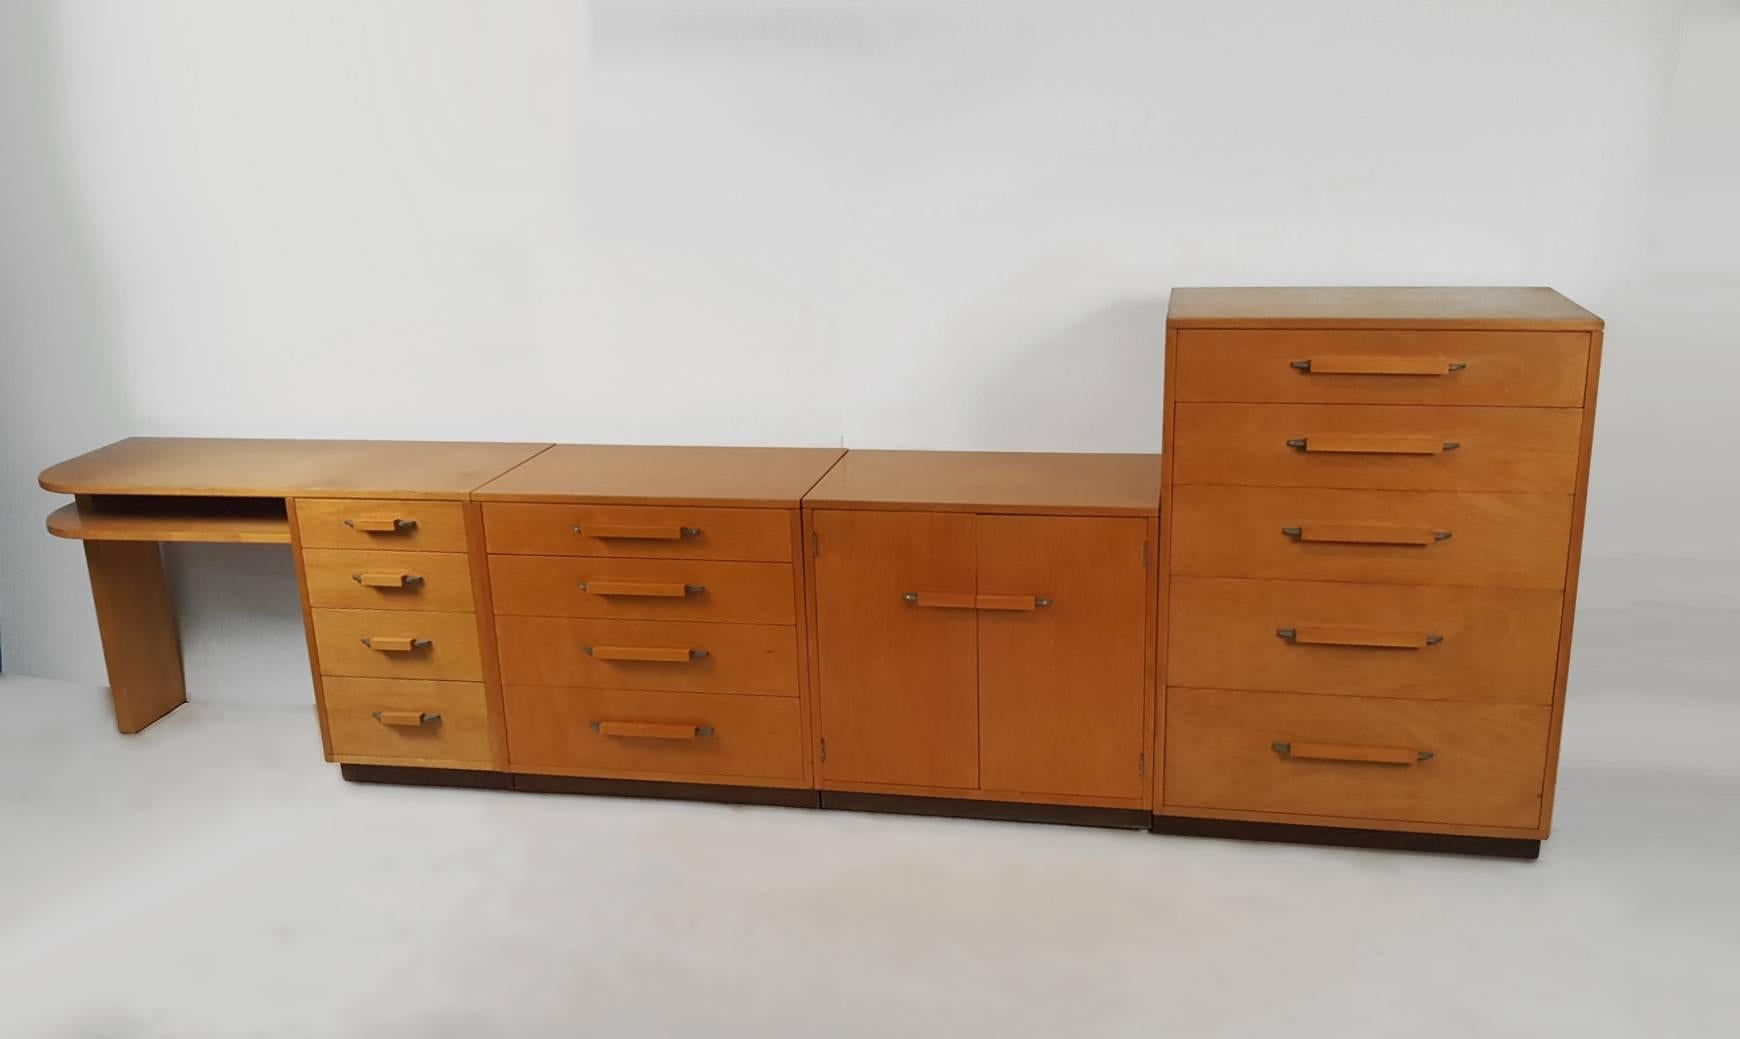 A collection of five different components from the 'Flexible Home Arrangement' collection designed by architect Eliel Saarinen in collaboration with his daughter for Johnson Furniture Company. Includes a desk, two chests of drawers, a cabinet with